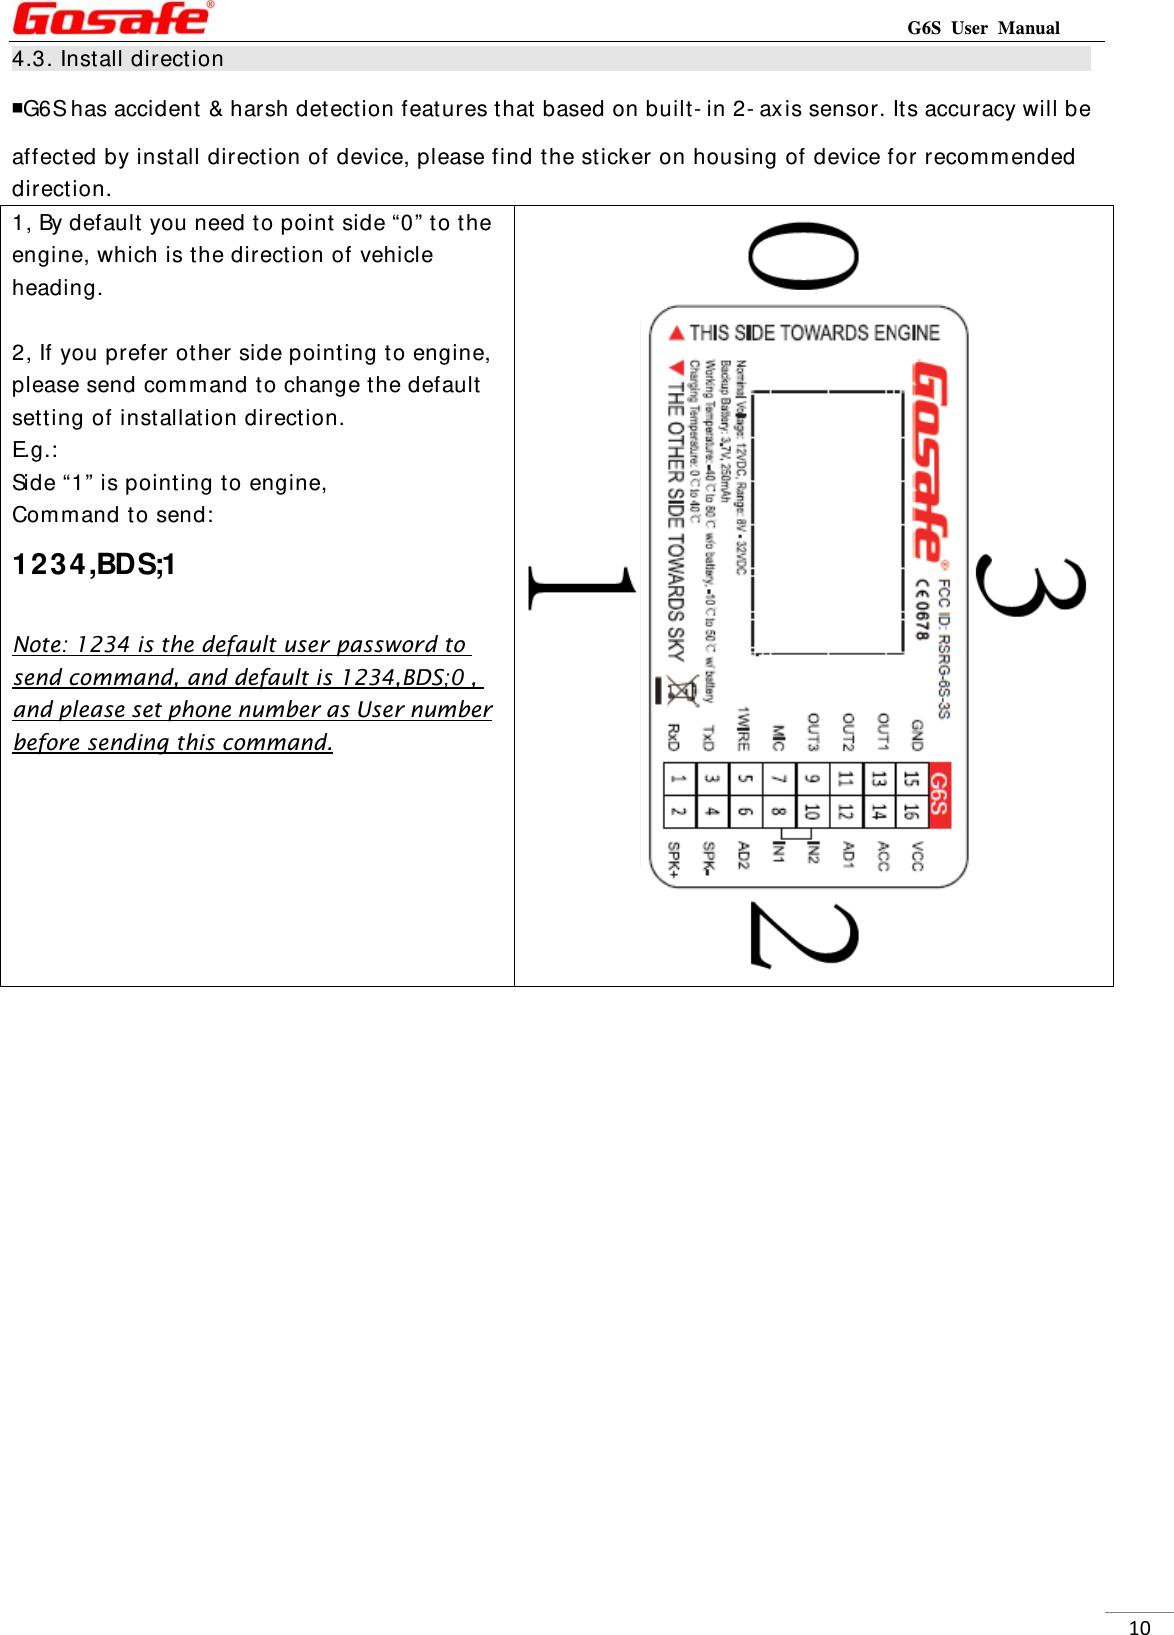                                                                           G6S User Manual  104.3. Install direction                                                                                   ￭G6S has accident &amp; harsh detection features that based on built- in 2- axis sensor. Its accuracy will be affected by install direction of device, please find the sticker on housing of device for recom mended direction. 1, By default you need to point side “0” to the engine, which is the direction of vehicle heading.  2, If you prefer other side pointing to engine, please send comm and to change the default setting of installation direction. E.g.:  Side “1” is pointing to engine, Command to send: 1234,BDS;1  Note: 1234 is the default user password to send command, and default is 1234,BDS;0 , and please set phone number as User number before sending this command.                  